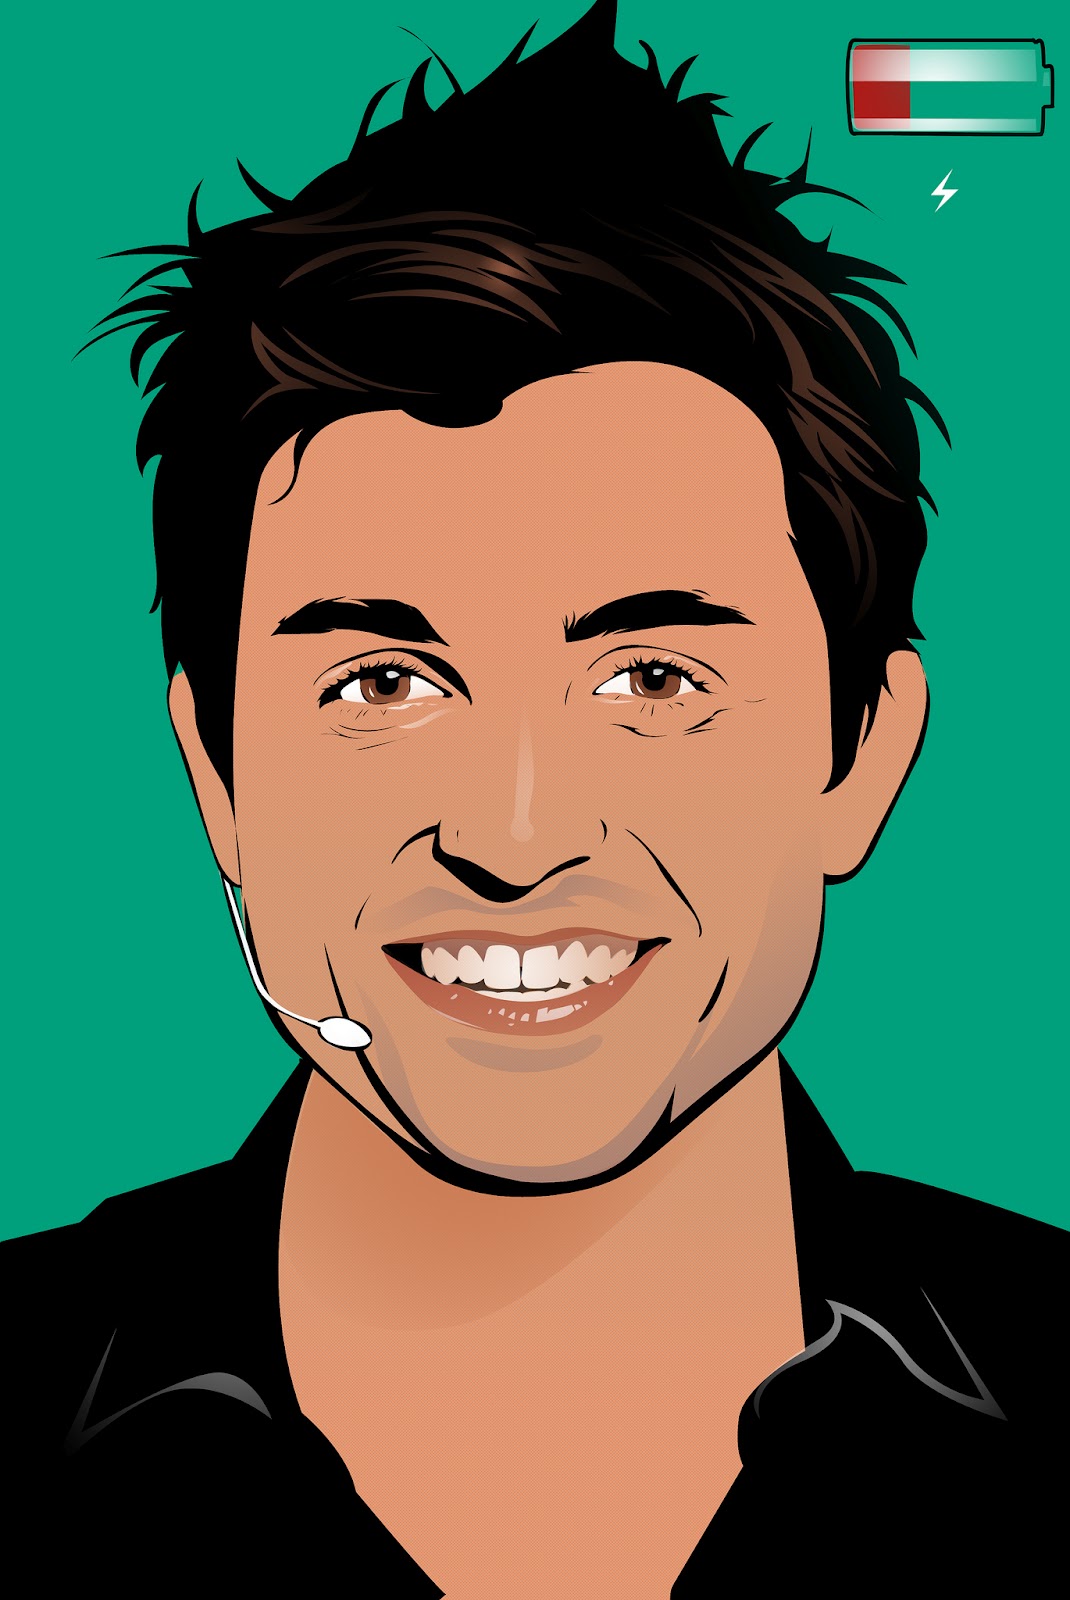 Caricature from Photo Online - Make a Cartoon of Yourself: Man Face Cartoon